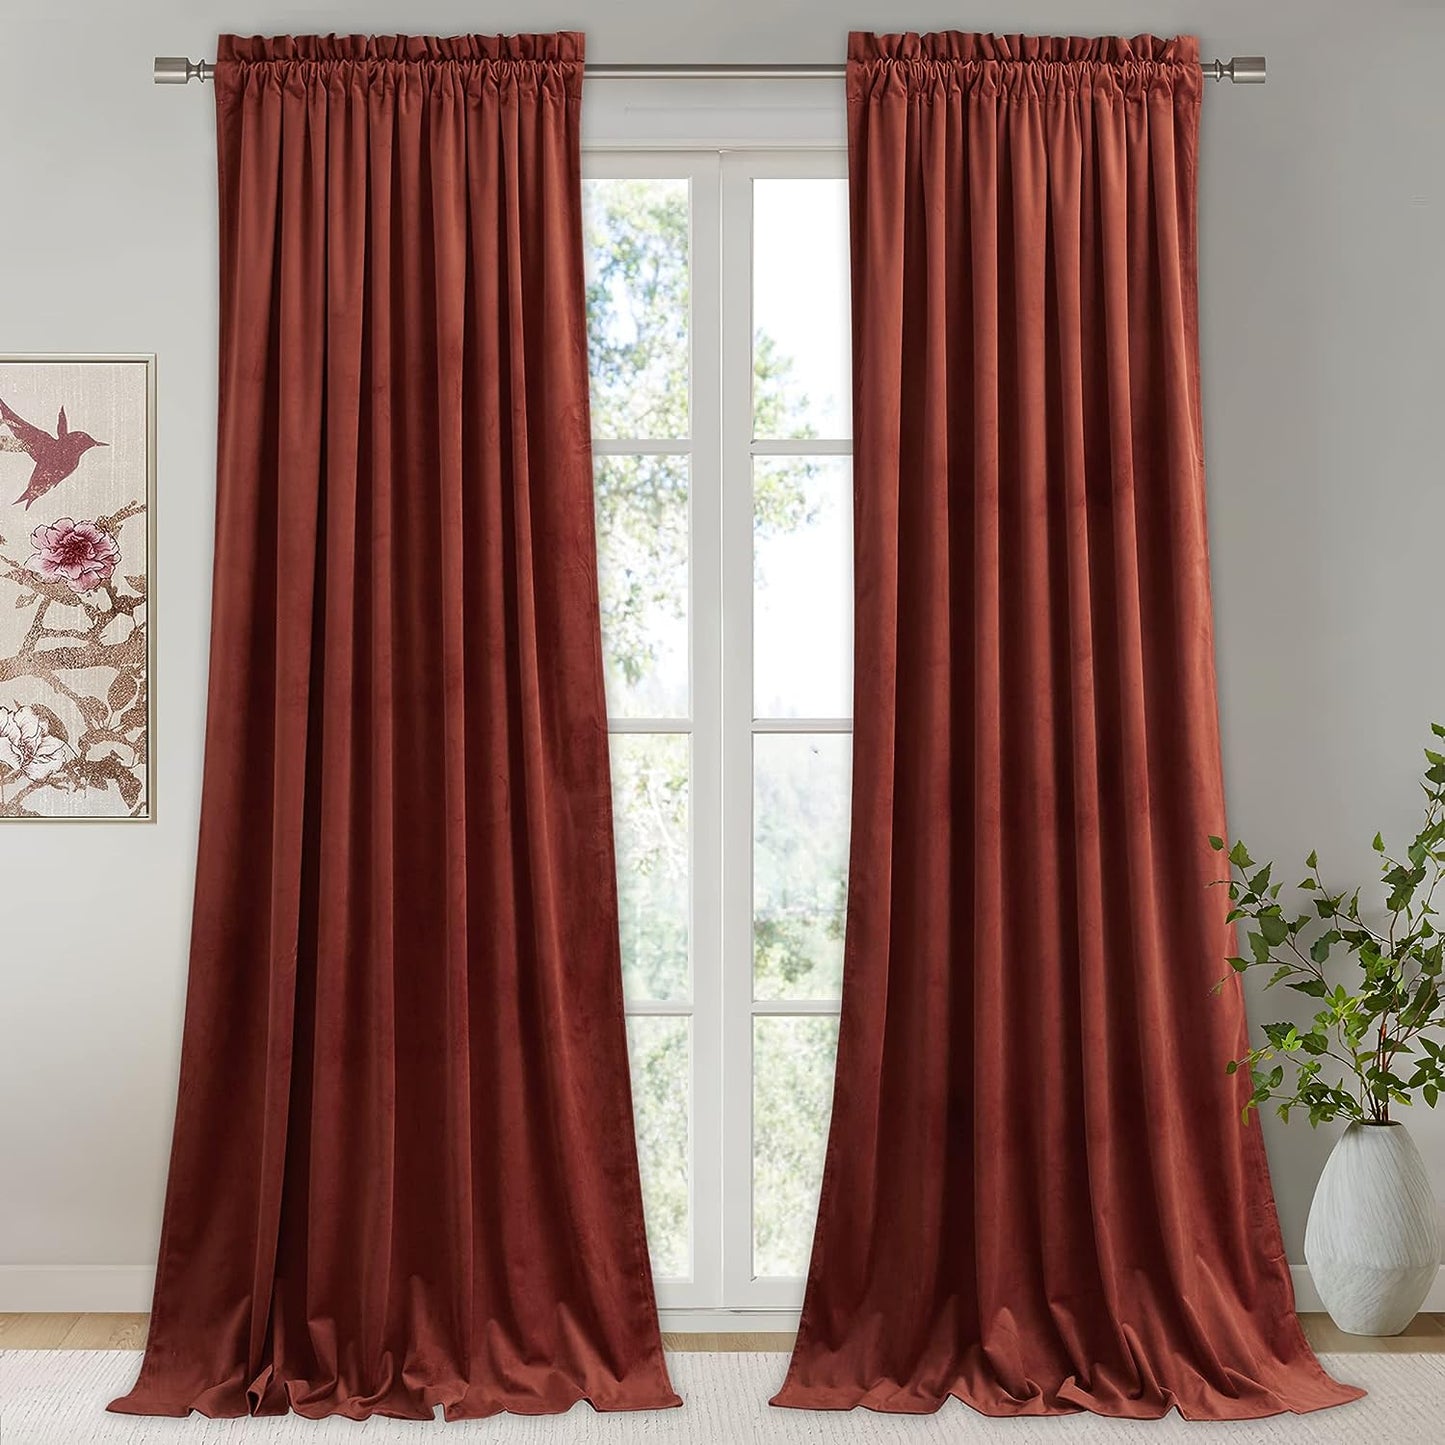 Stangh Theater Red Velvet Curtains - Super Soft Velvet Blackout Insulated Curtain Panels 84 Inches Length for Living Room Holiday Decorative Drapes for Master Bedroom, W52 X L84, 2 Panels  StangH Rust W52" X L108" 